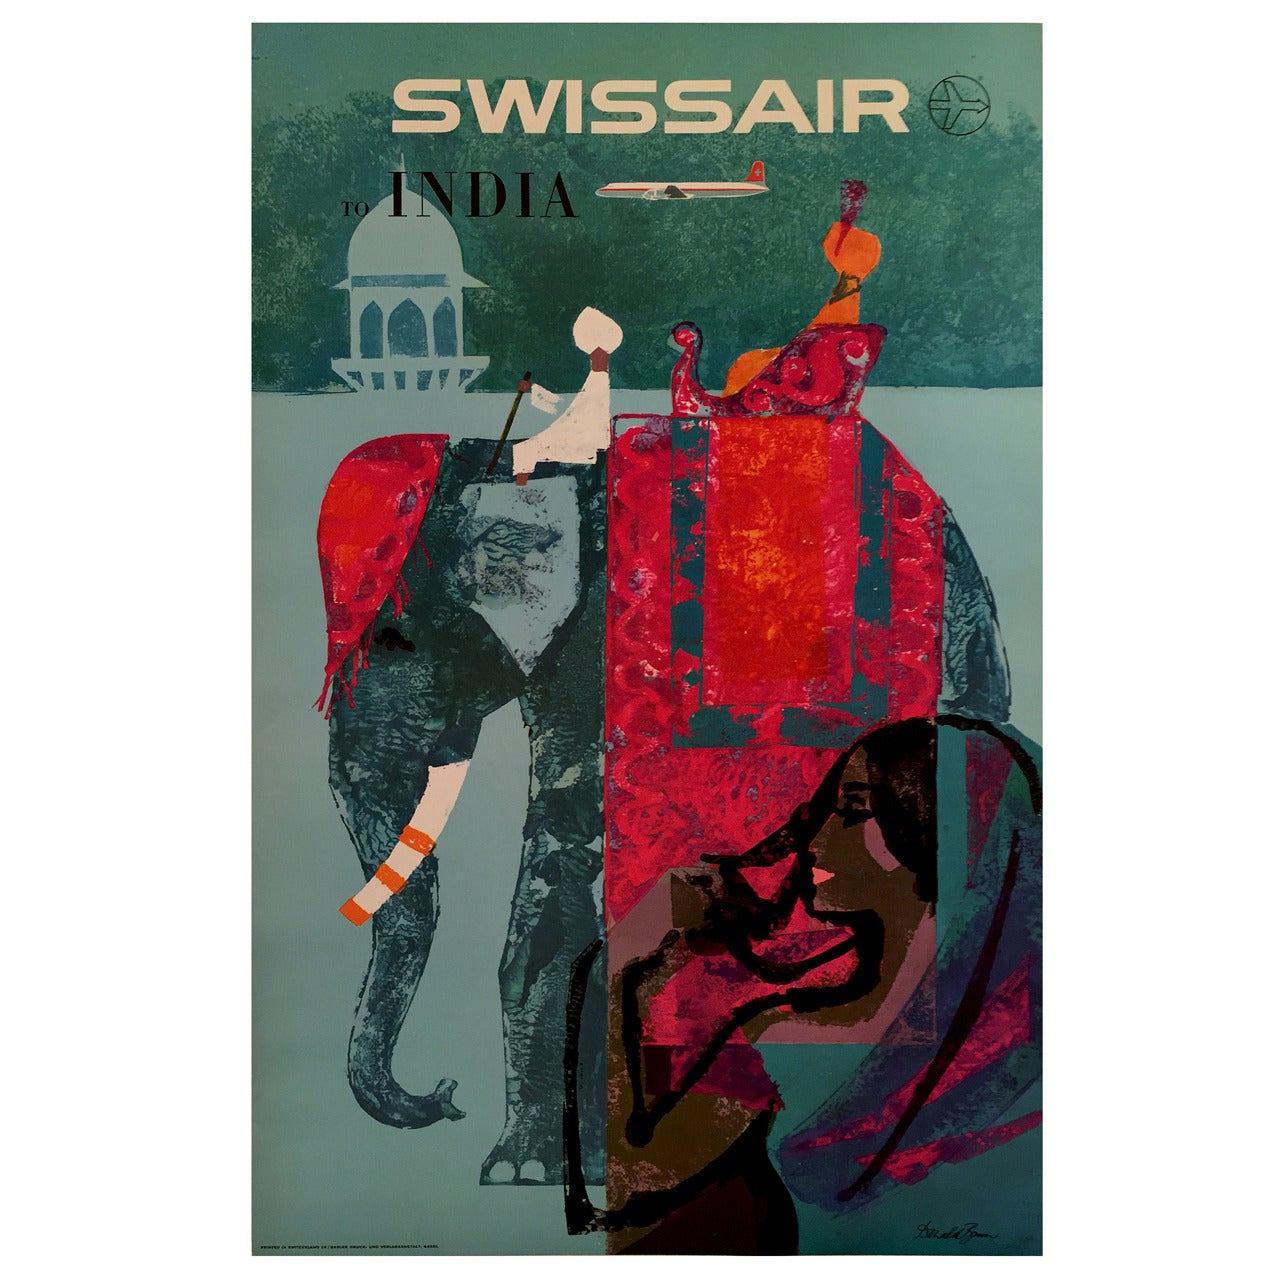 Swiss Mid-Century Modern Period Travel Poster to India by Donald Brun